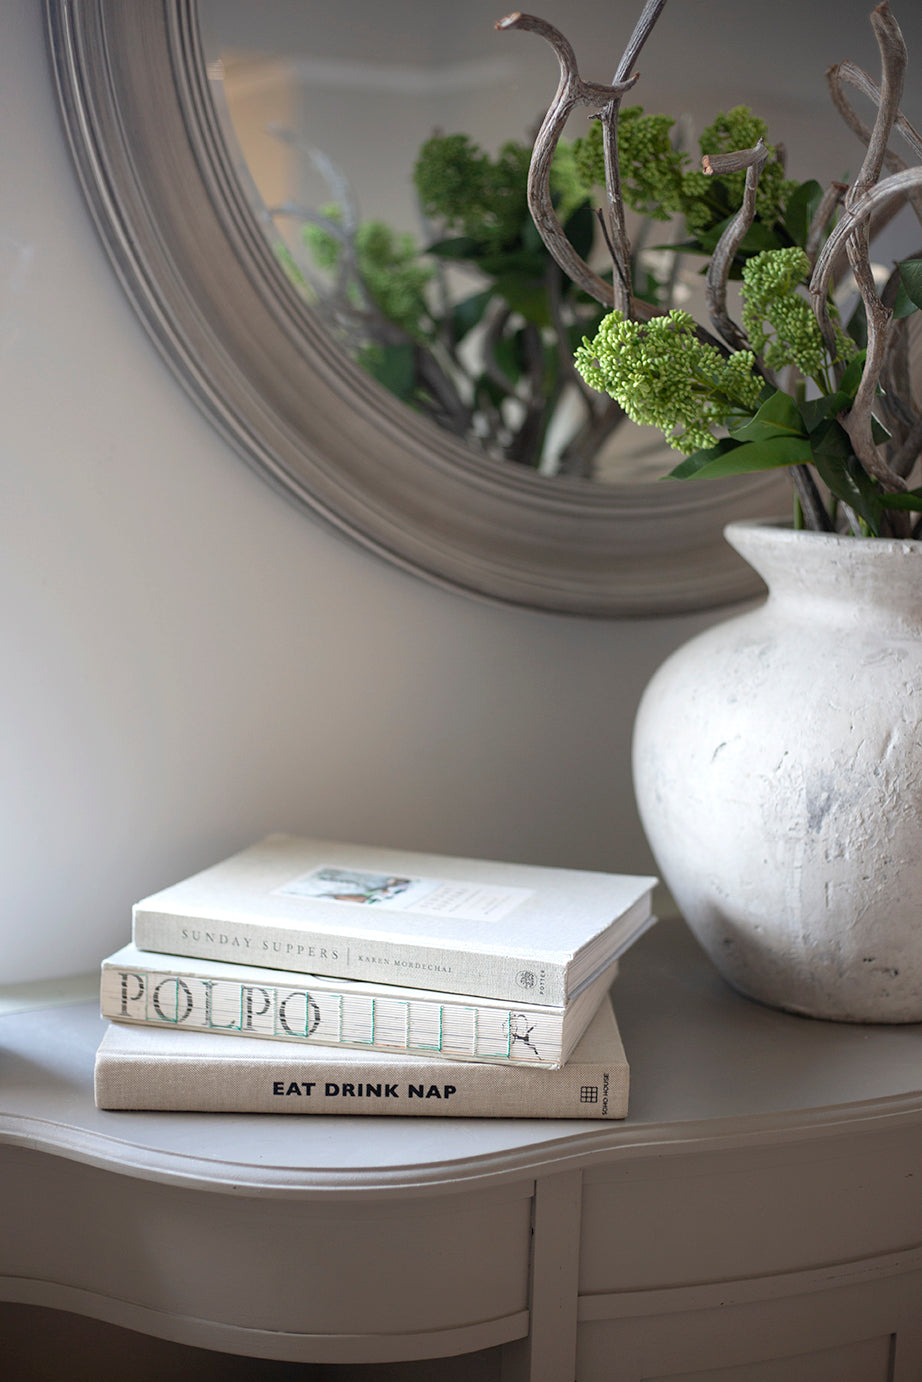 Beautiful Coffee Table Books for Decorating Your Home - Welsh